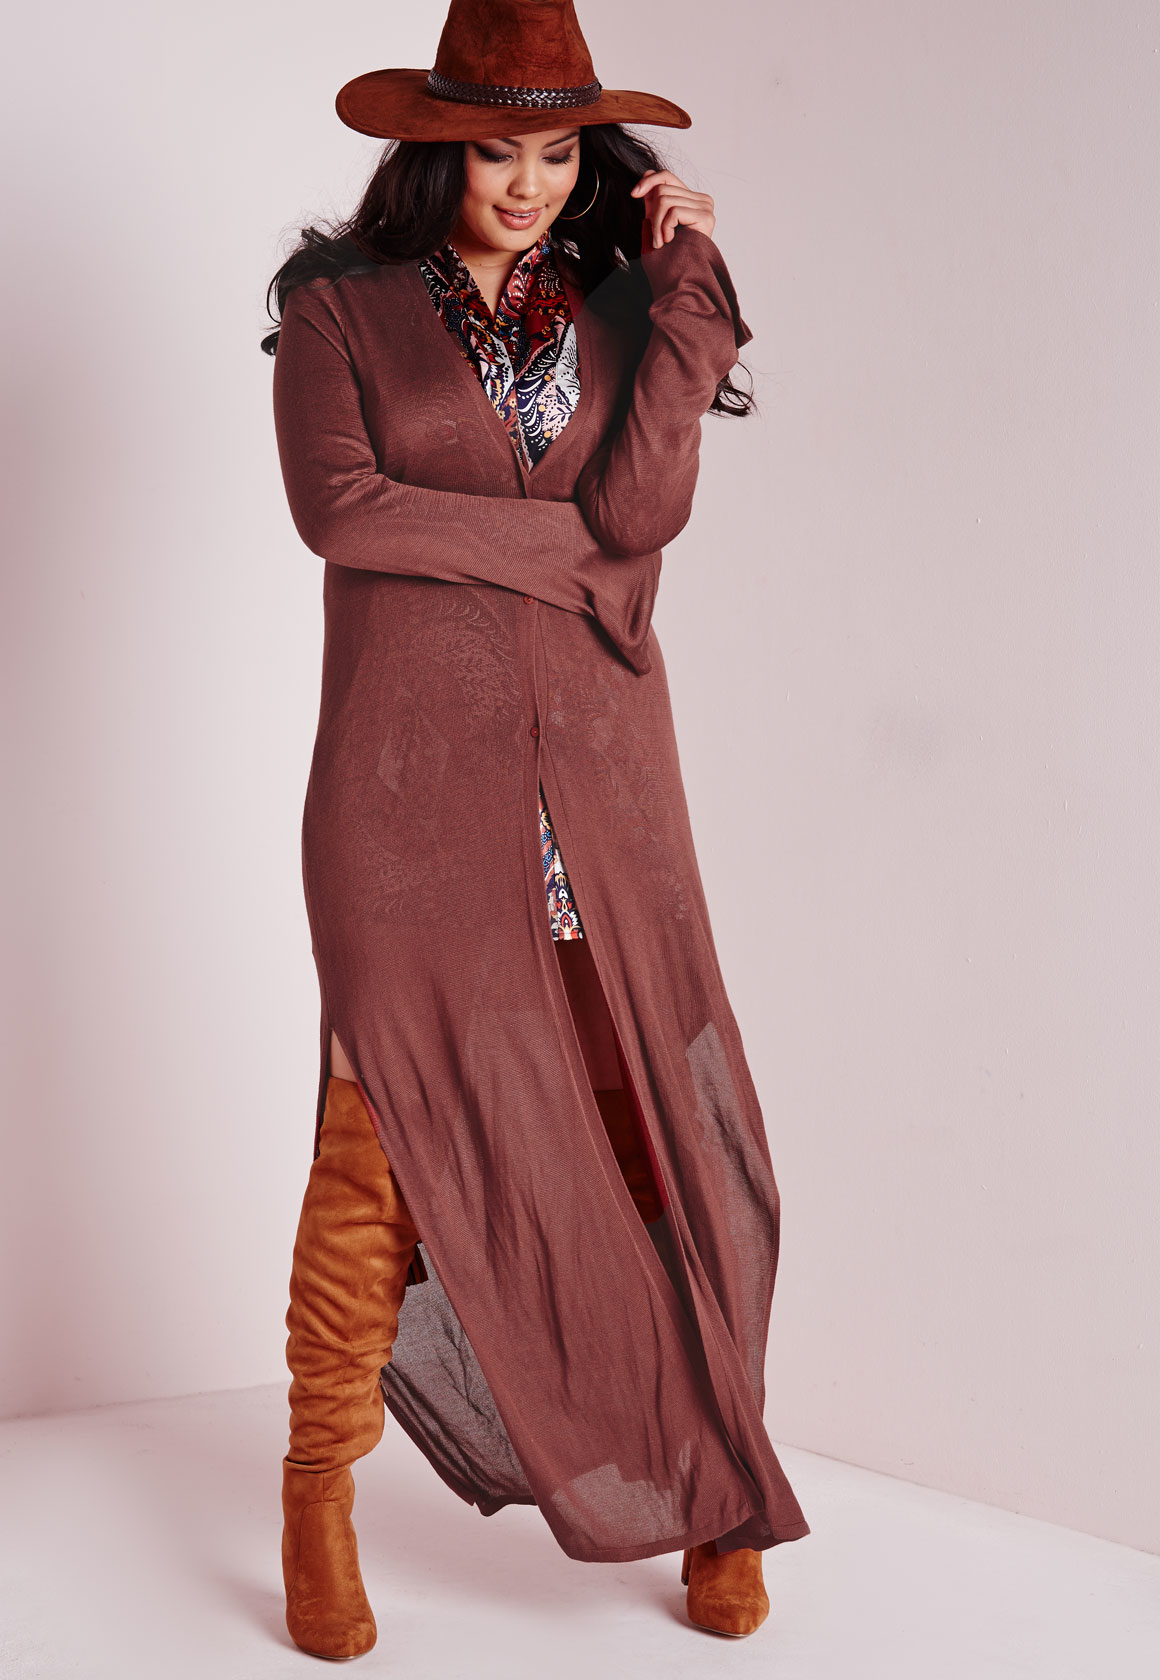 Lyst Missguided Plus  Size  Maxi Cardigan  Rust  in Brown